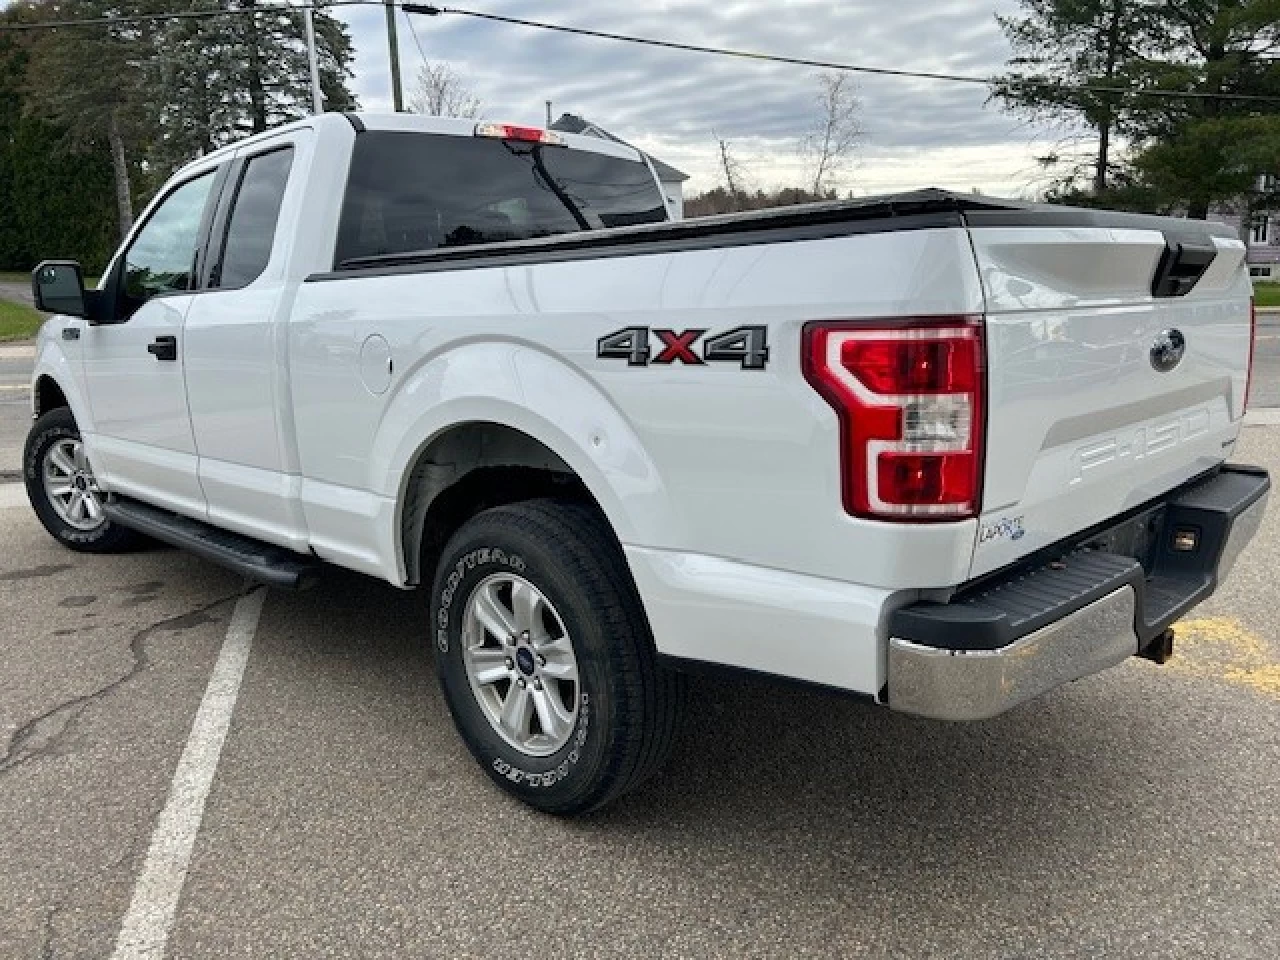 2019 Ford F-150 XLT Main Image